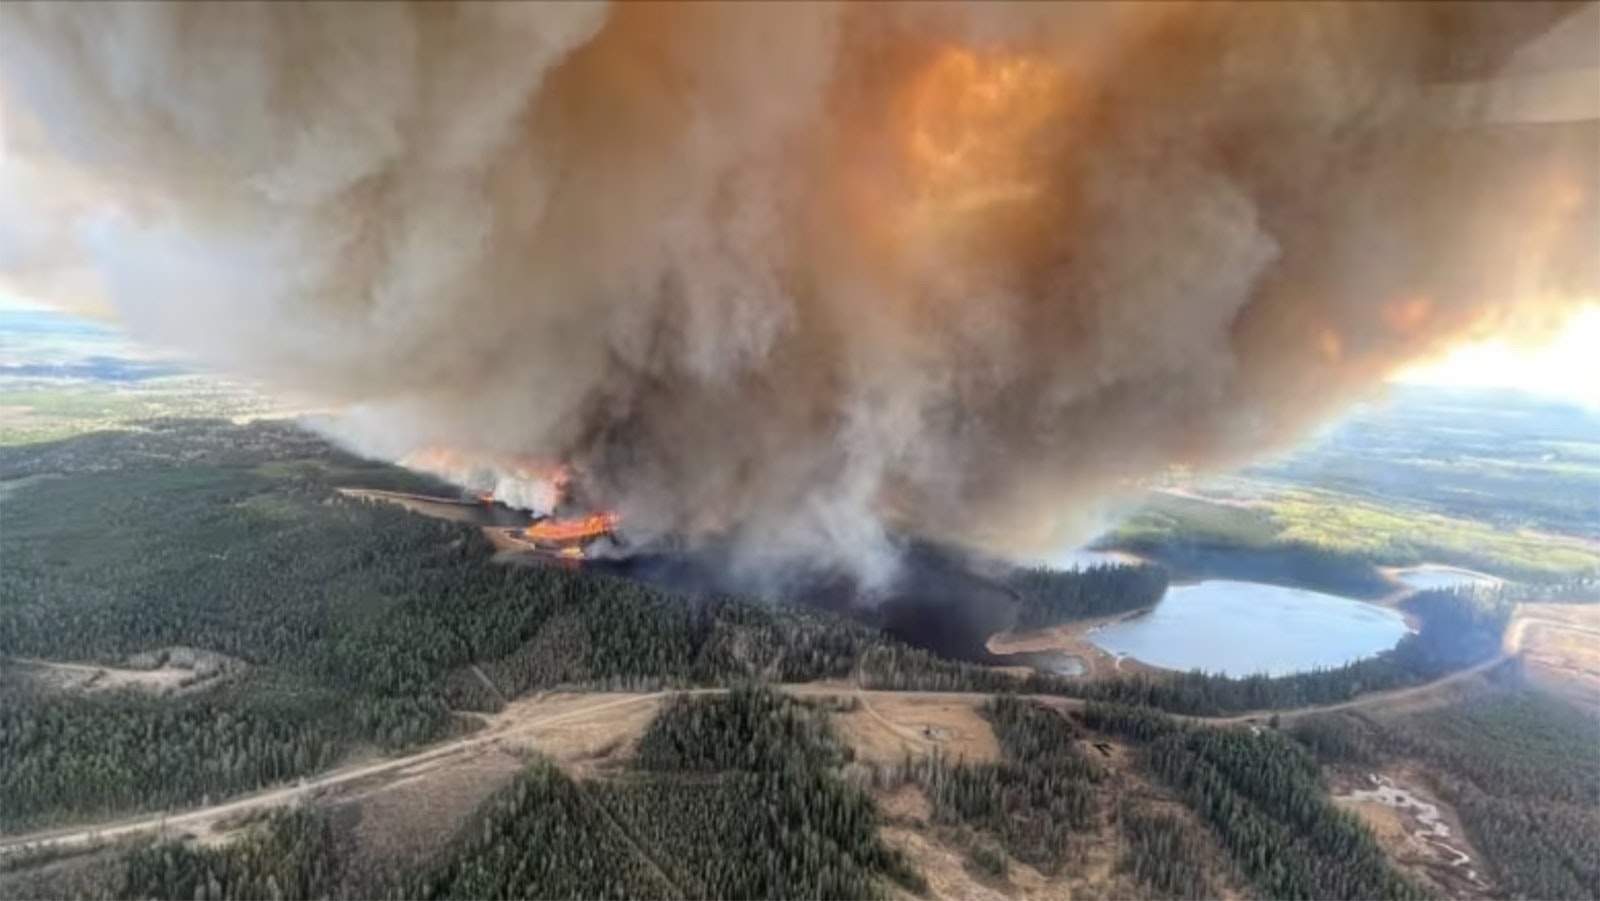 The Edson Fire in Alberta, Canada, burns, sending huge plumes of smoke into the atmosphere.